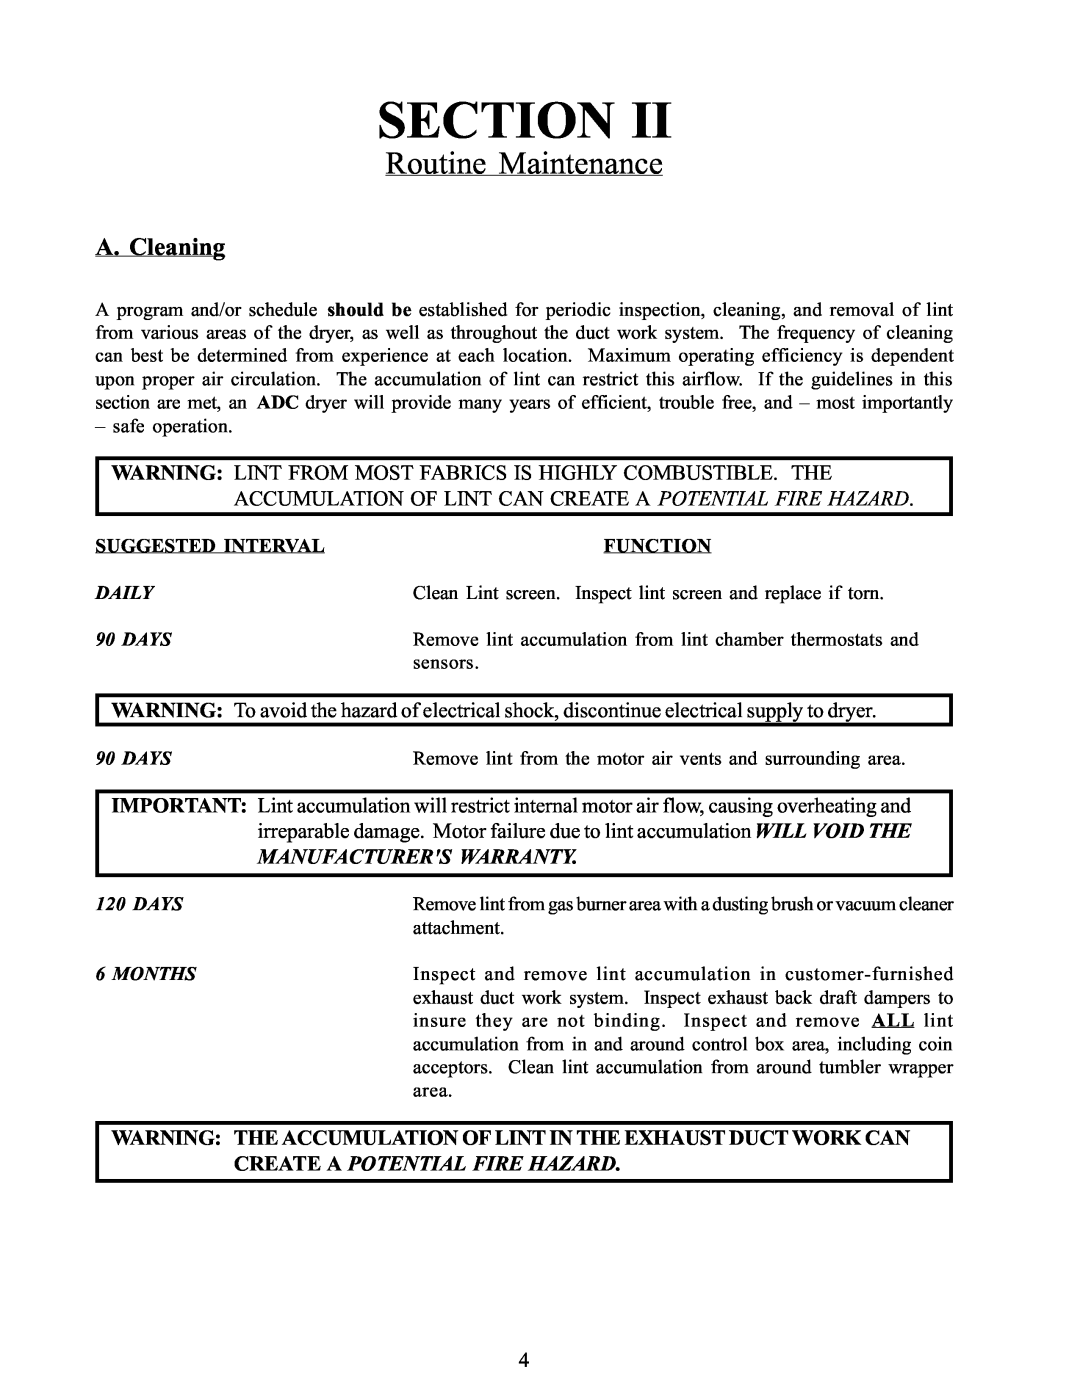 American Dryer Corp WDA-385 service manual Routine Maintenance, A. Cleaning, Section 